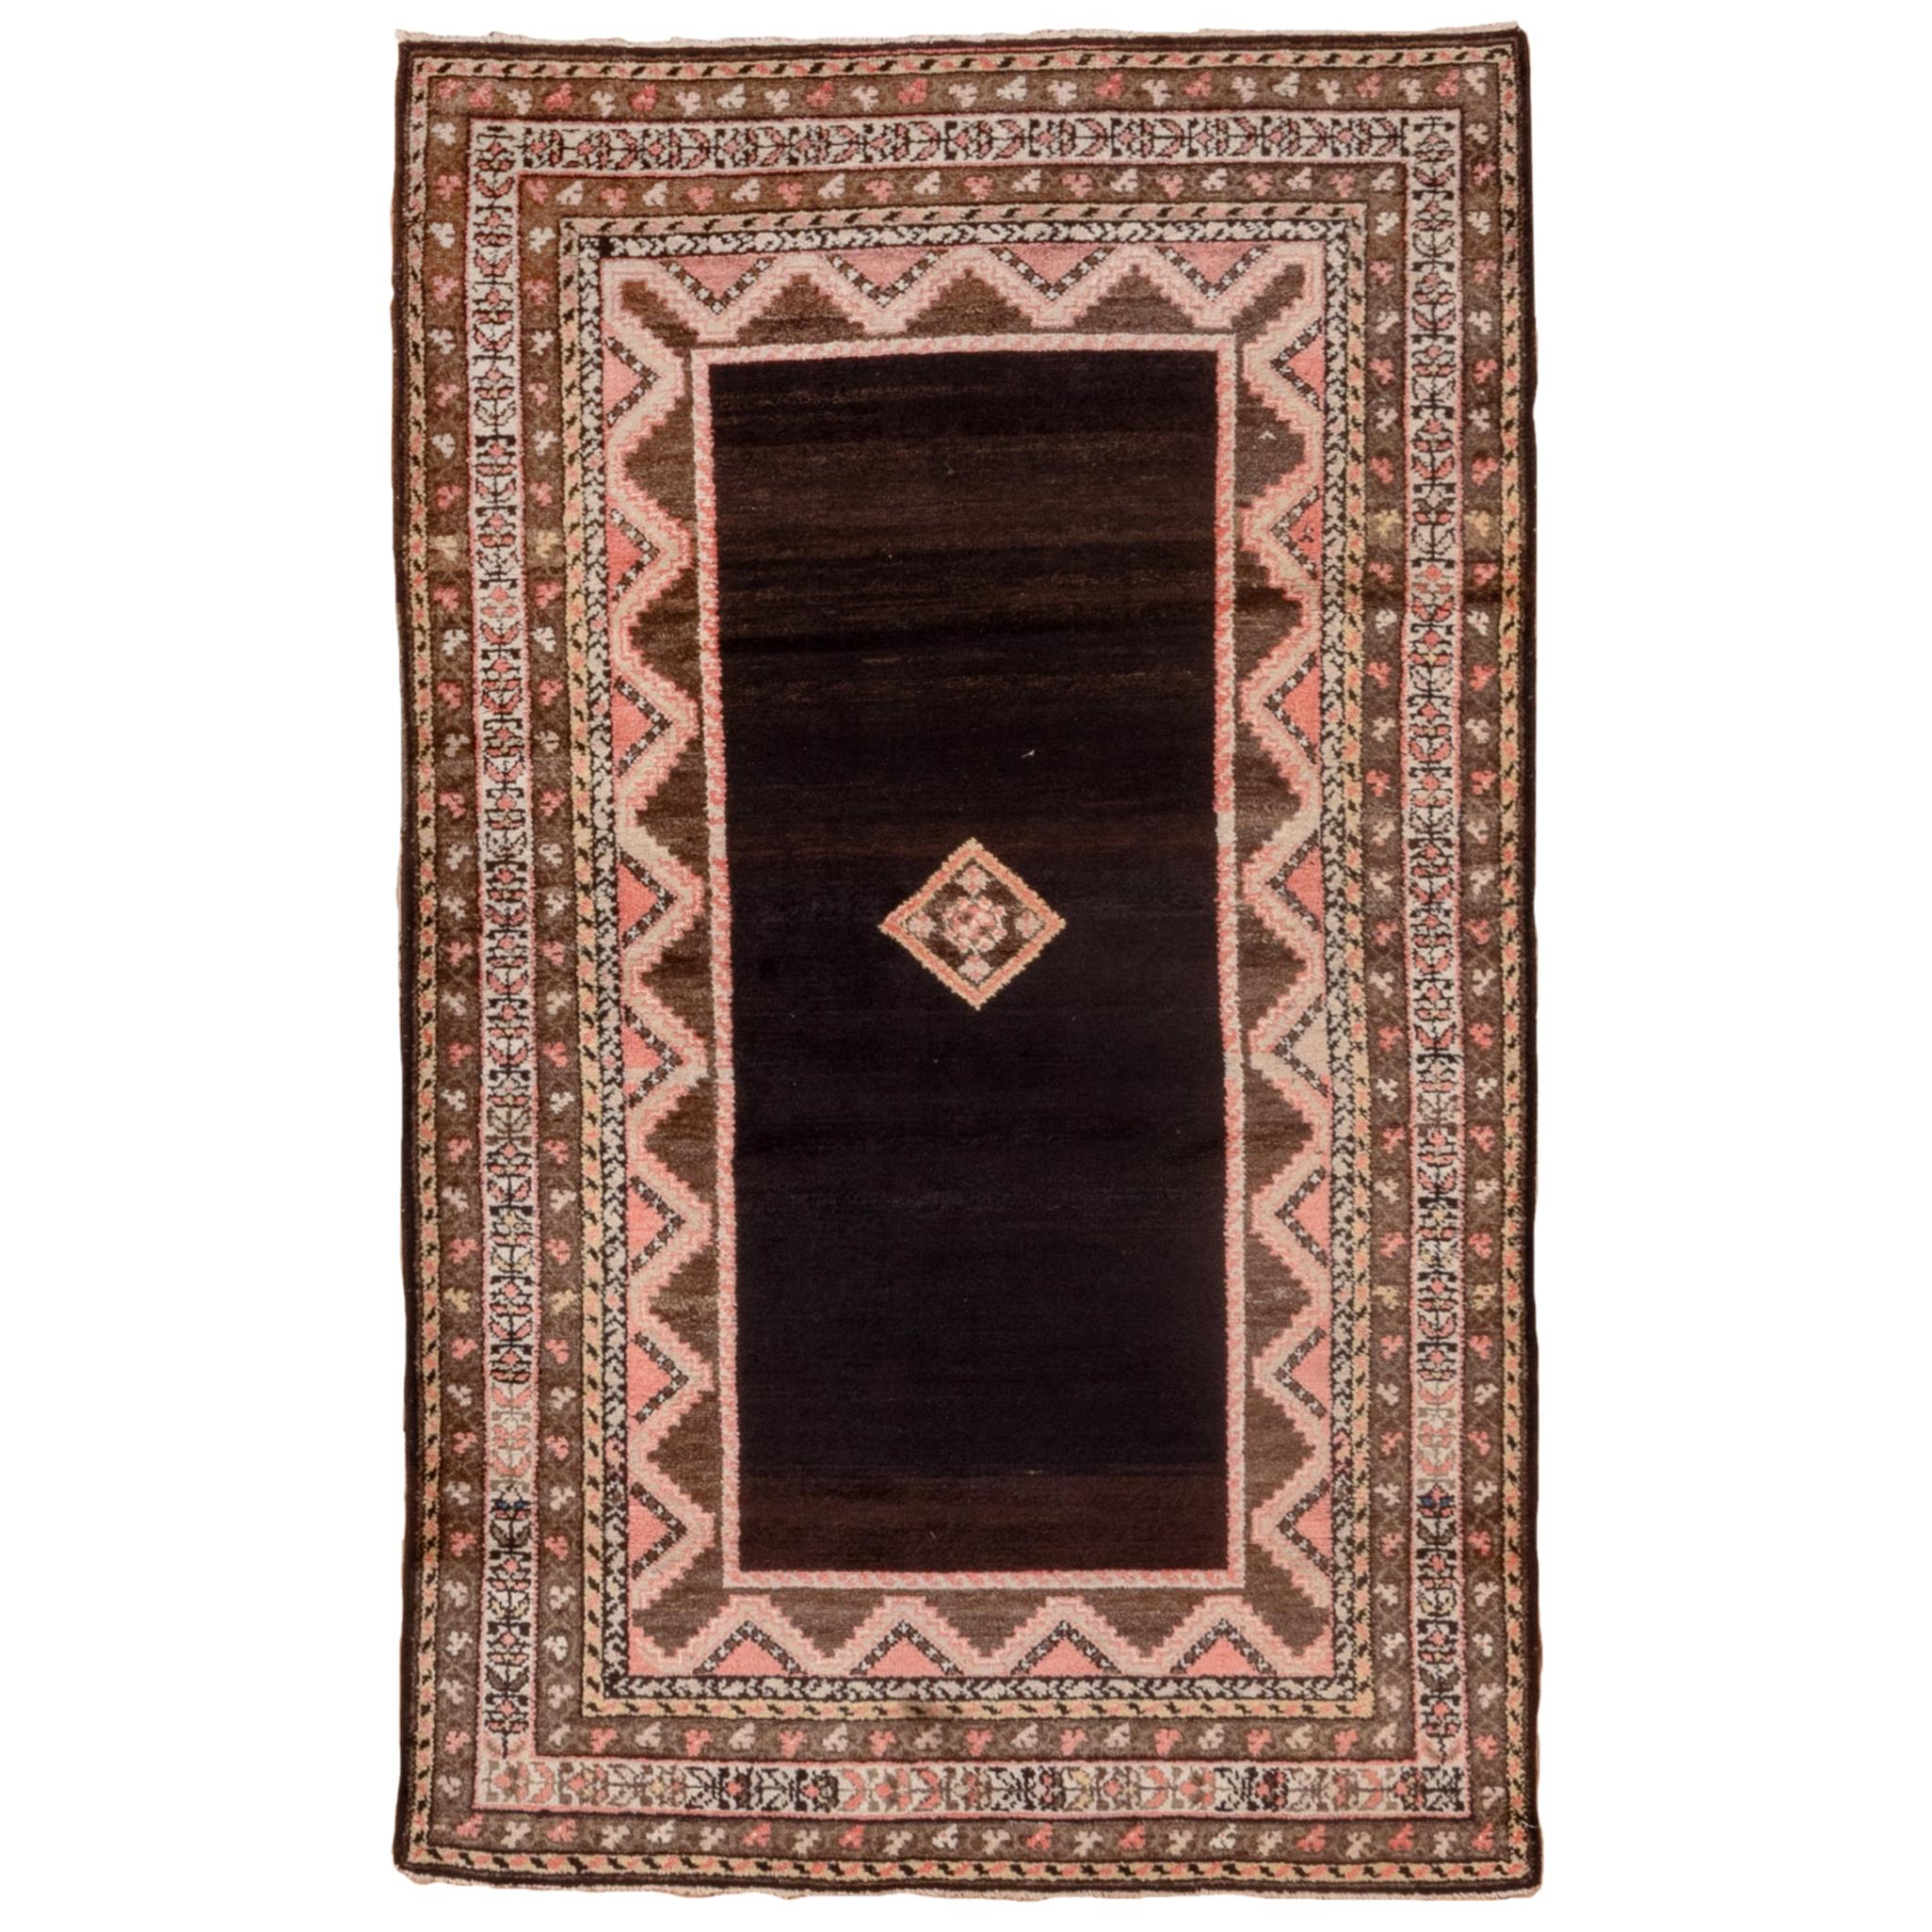 Antique Rustic Persian Hamadan Rug, Chocolate Brown Field, Pink Accents